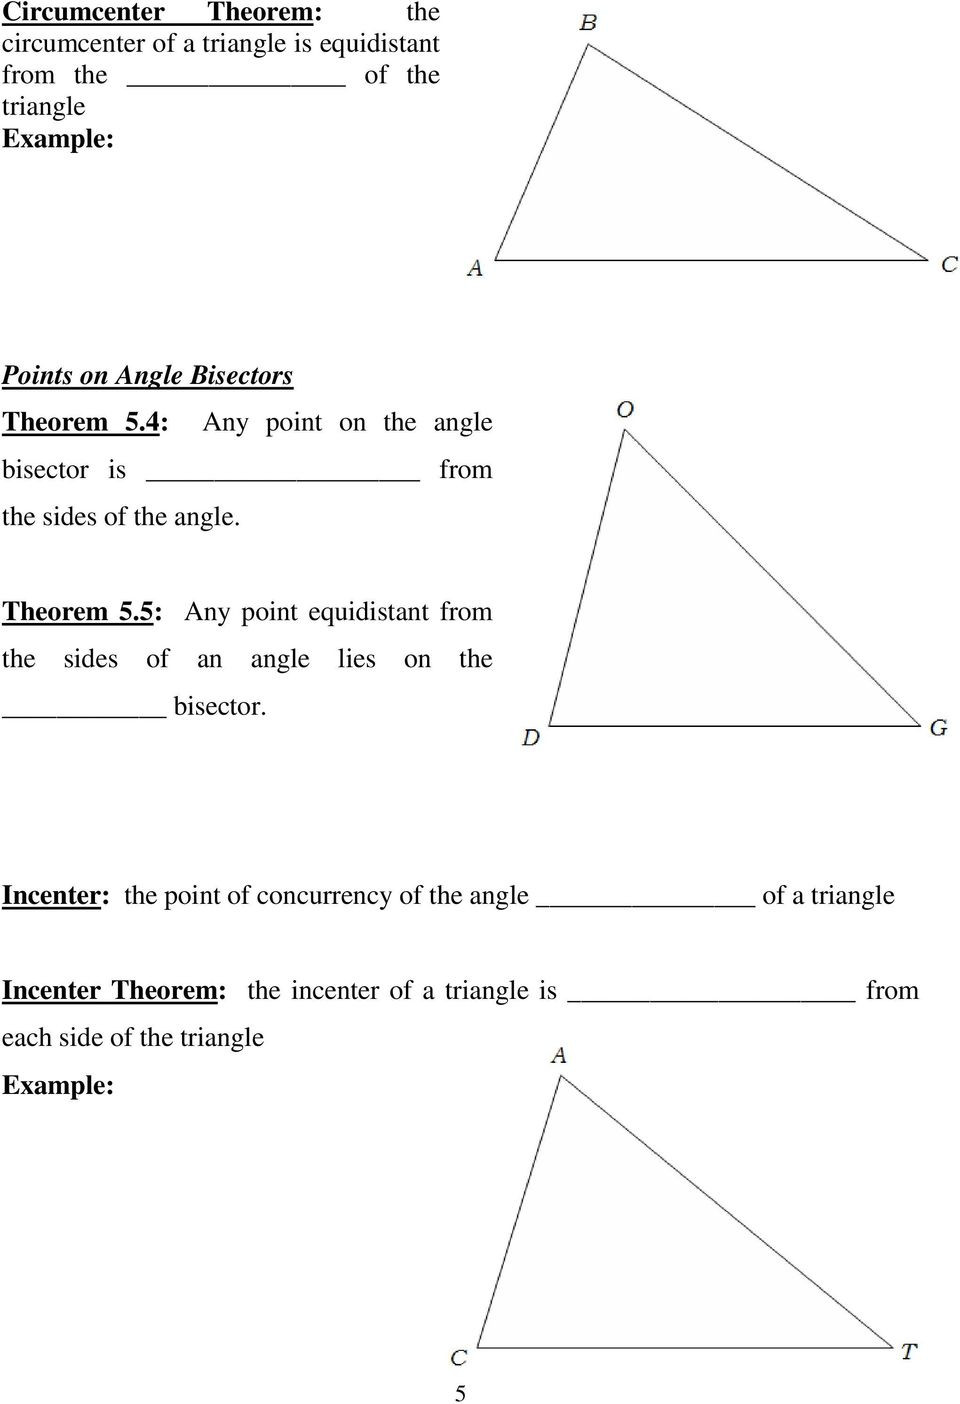 Points Of Concurrency Worksheet Geometry Relationships In Triangles Unit 5 Name Pdf